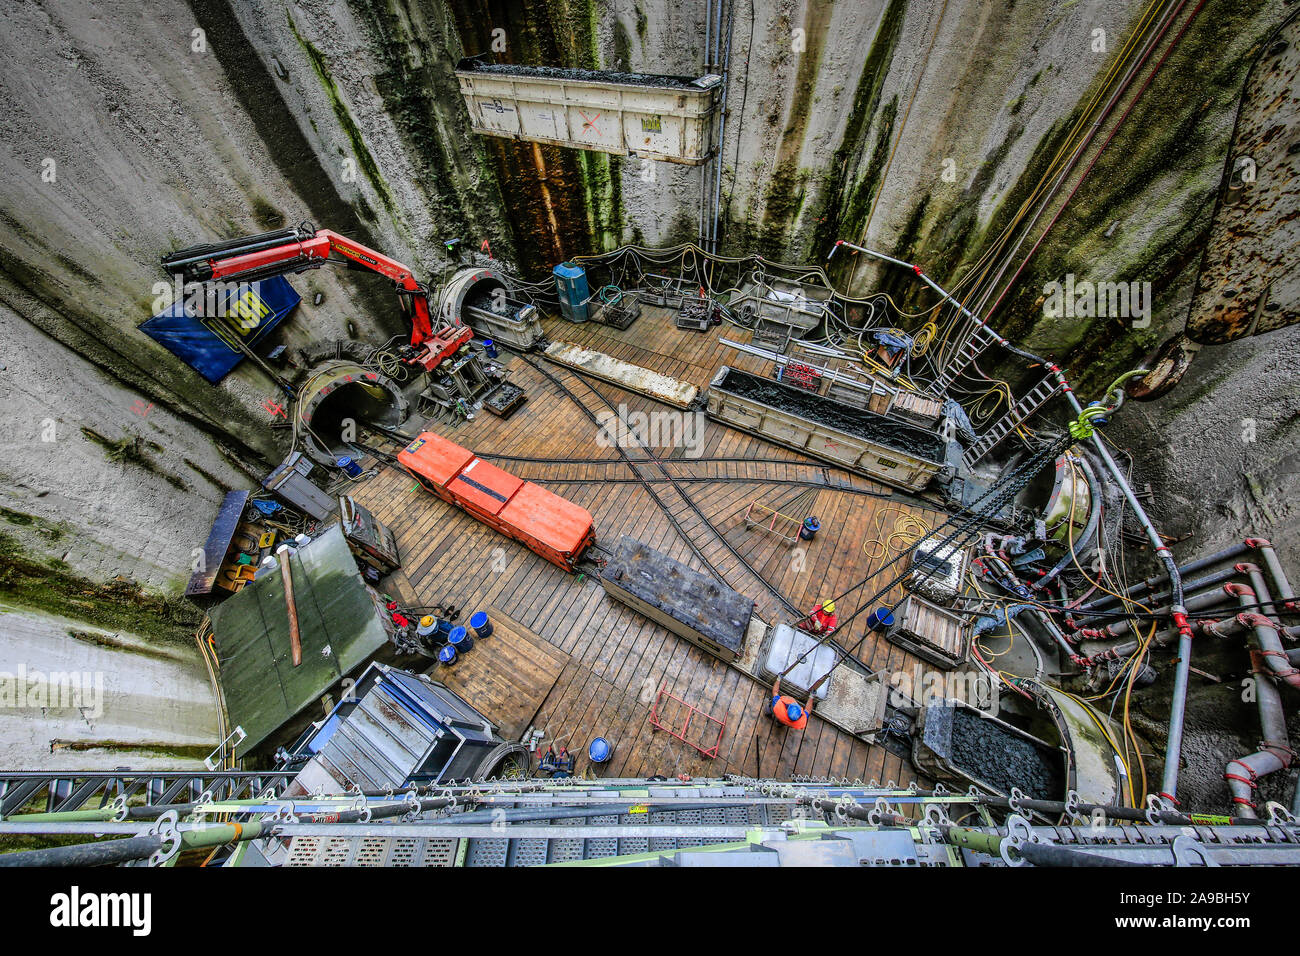 16.06.2016, Oberhausen, North Rhine-Westphalia, Germany - Emscher conversion, new construction of the Emscher sewer AKE, tuebbing tunneling at shaft 2 Stock Photo